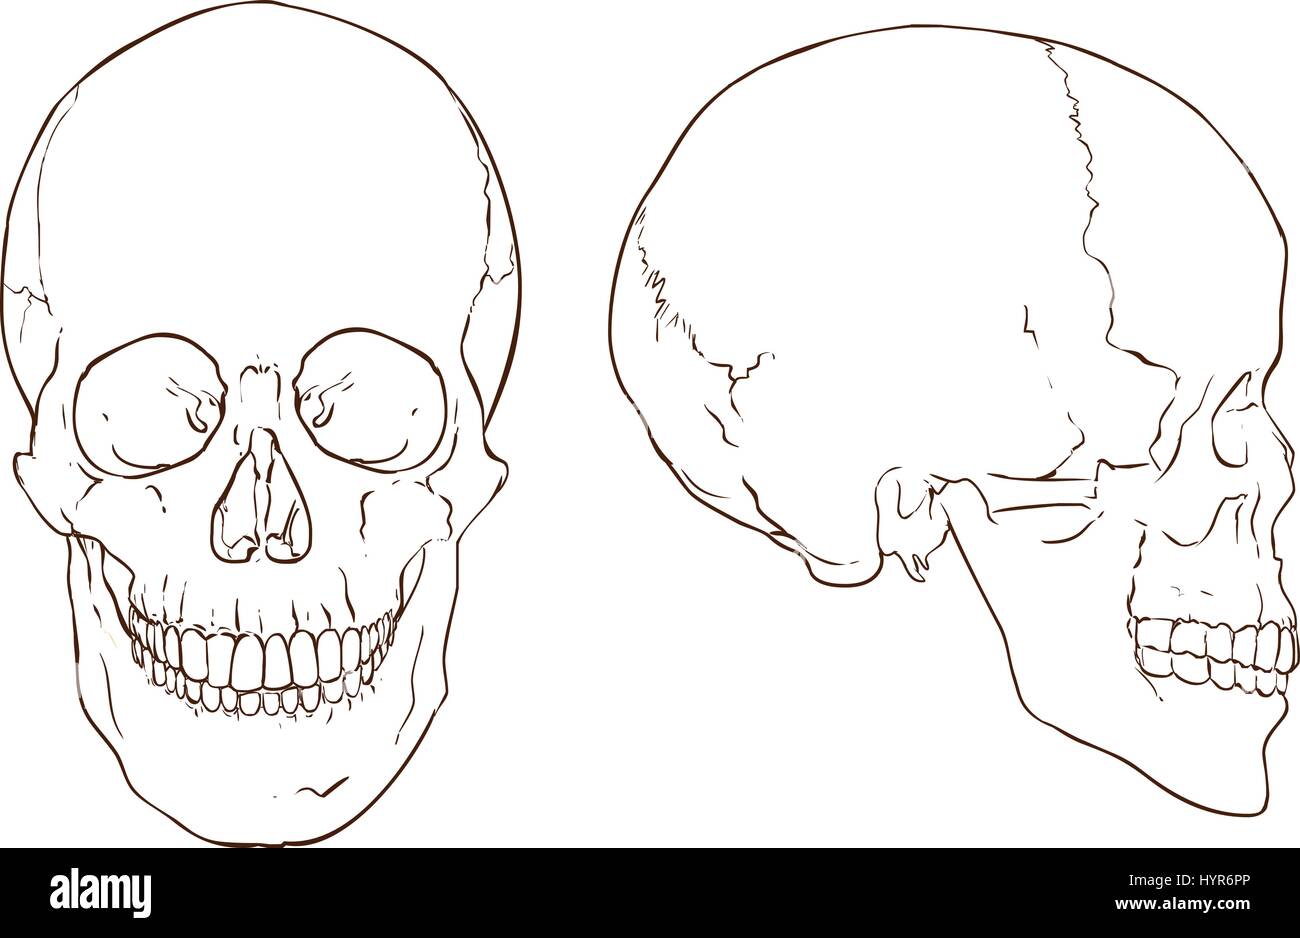 white backround vector illustration of a  people skull Stock Vector